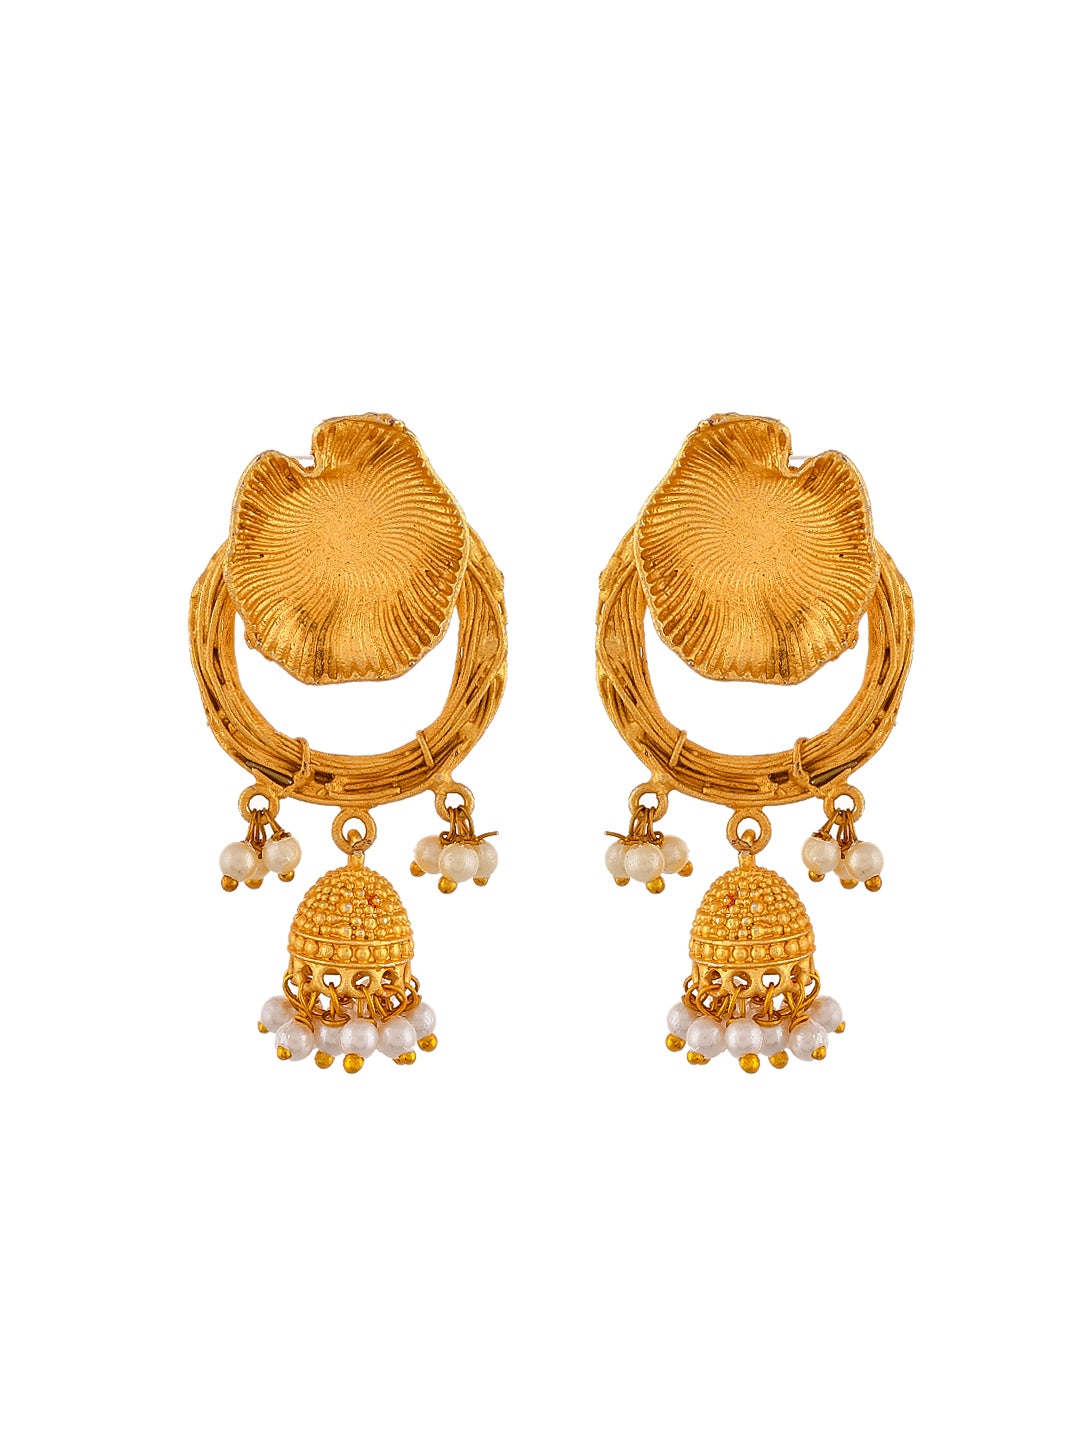 Gold Plated Handcrafted Jhumka Earrings